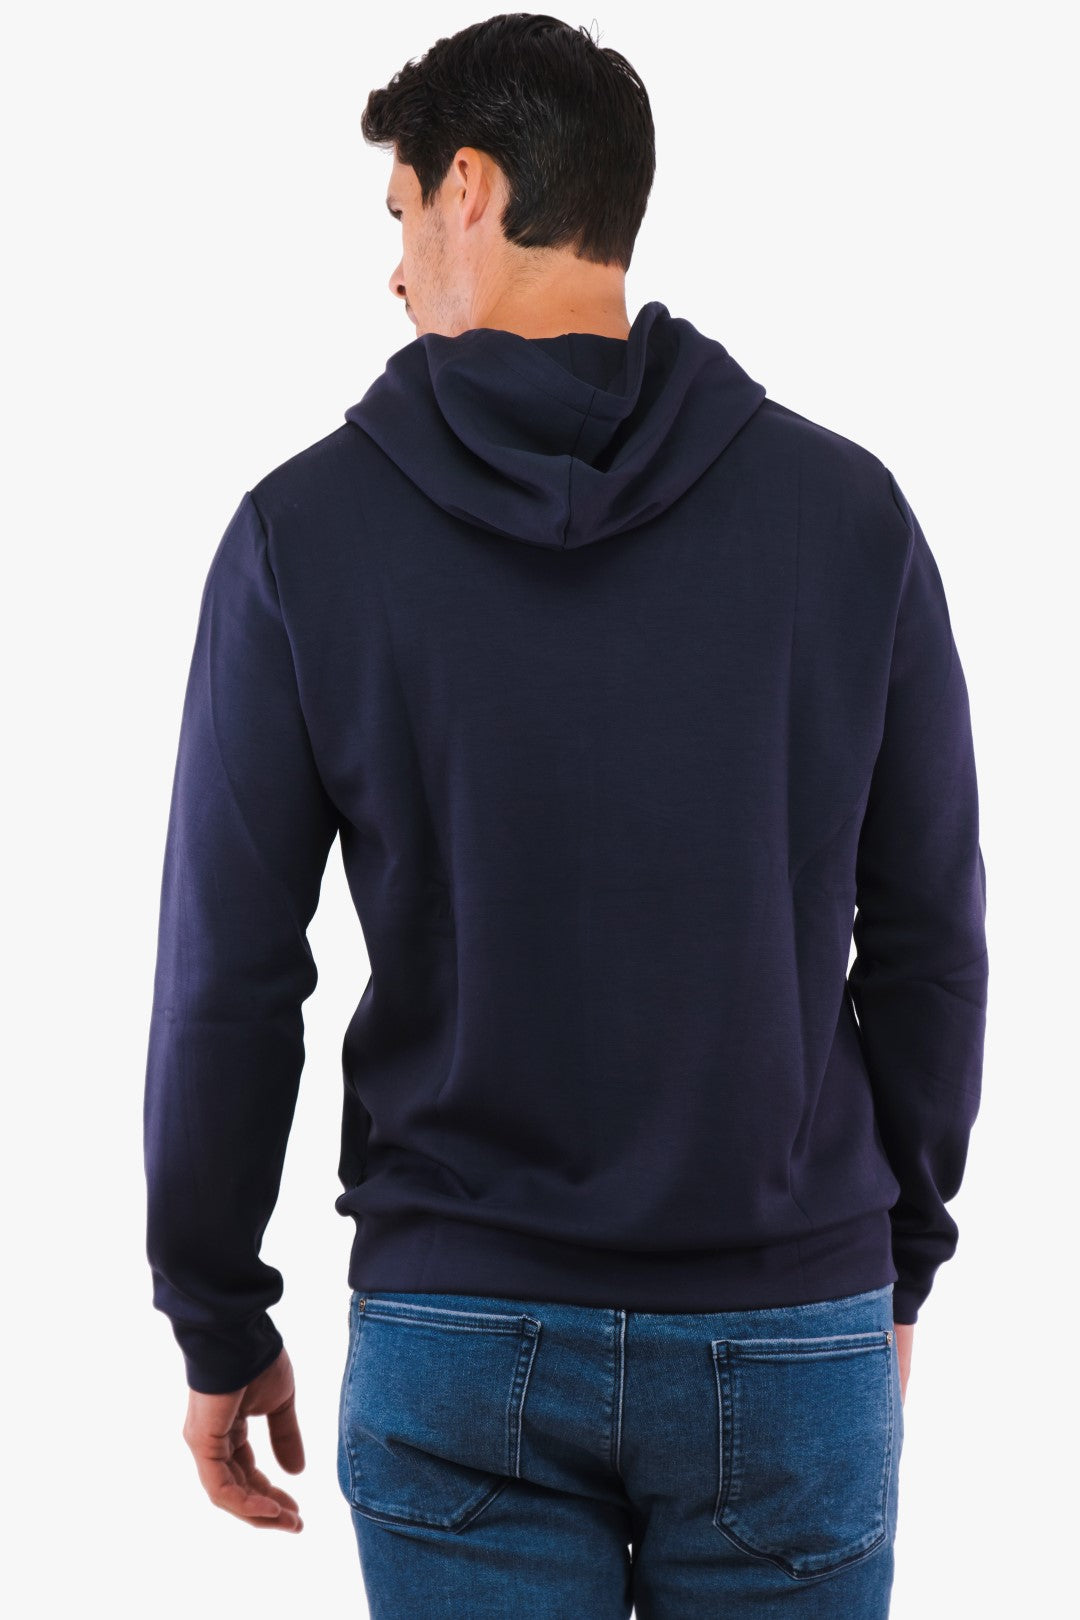 Navy Matinique Sweater